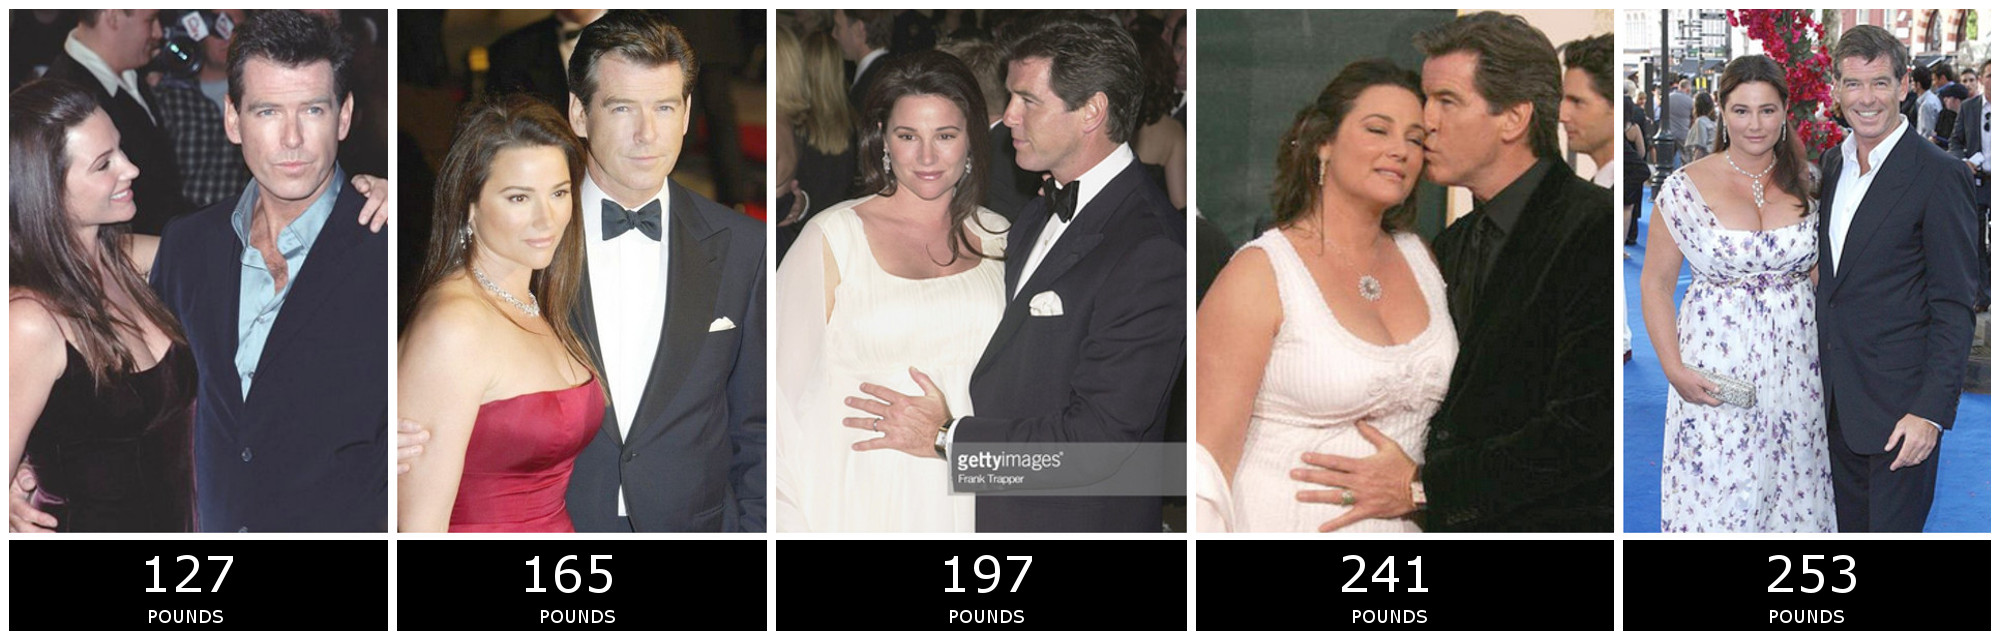 based on the theory that Pierce Brosnan is a weight gain fetishist who inte...